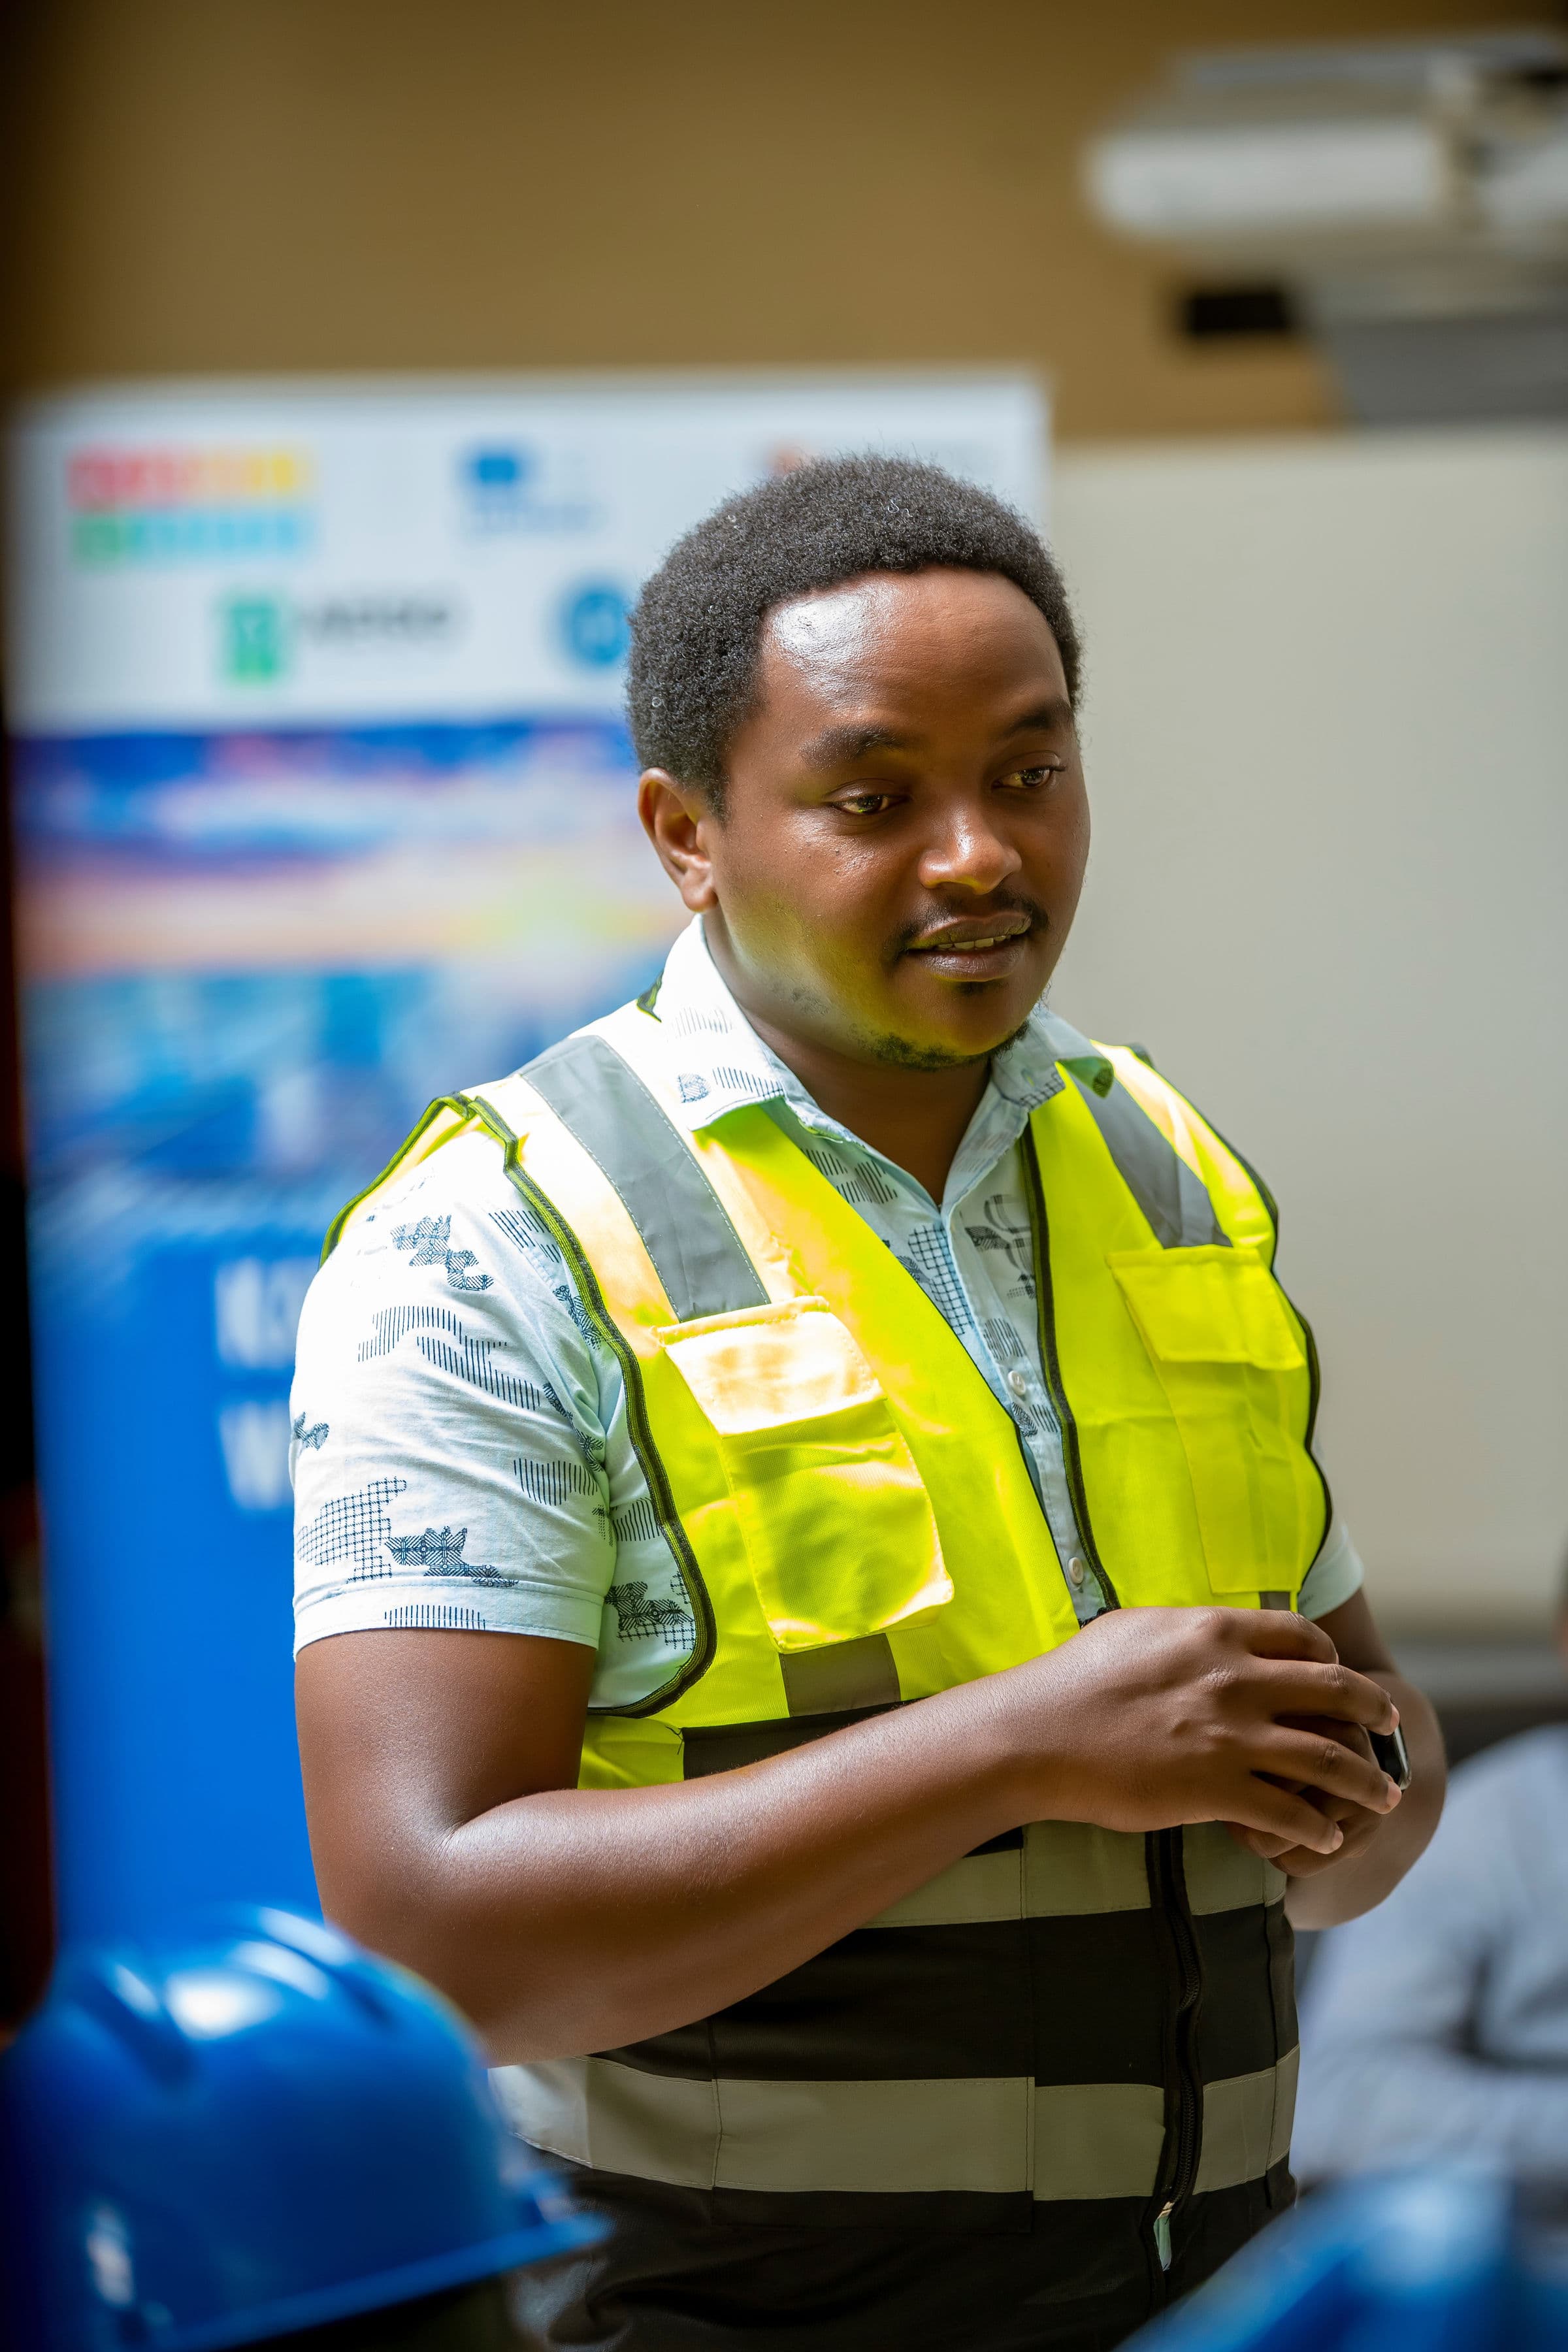 Kimani Gichauce  is the Executive Director of Adili Solar Hubs is a youth led social enterprise that focuses on building and running clean energy solutions for advancement of rural economies